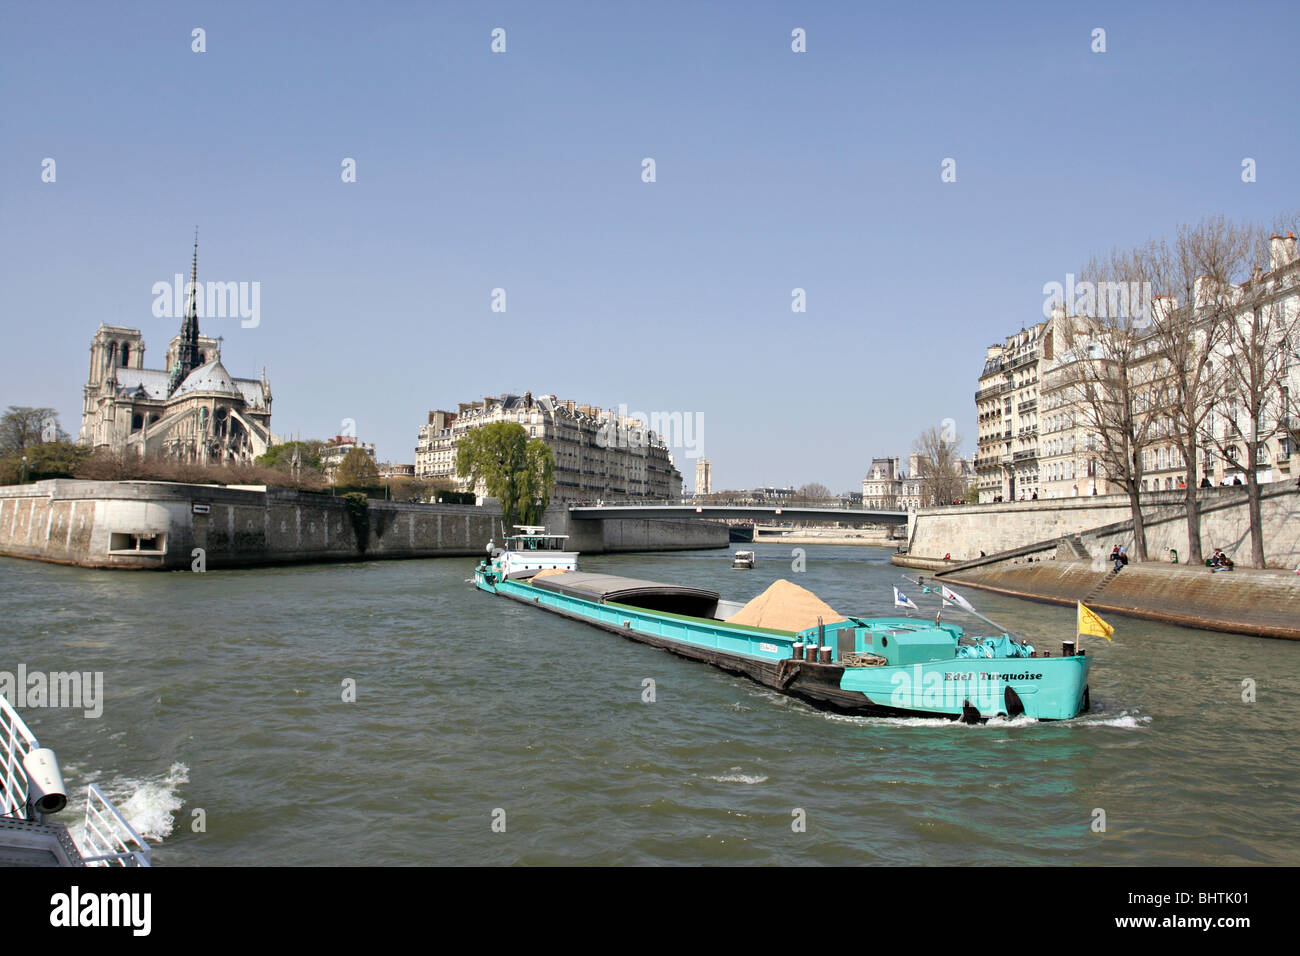 Boat carrying sand on River Seine in Paris, France. Stock Photo